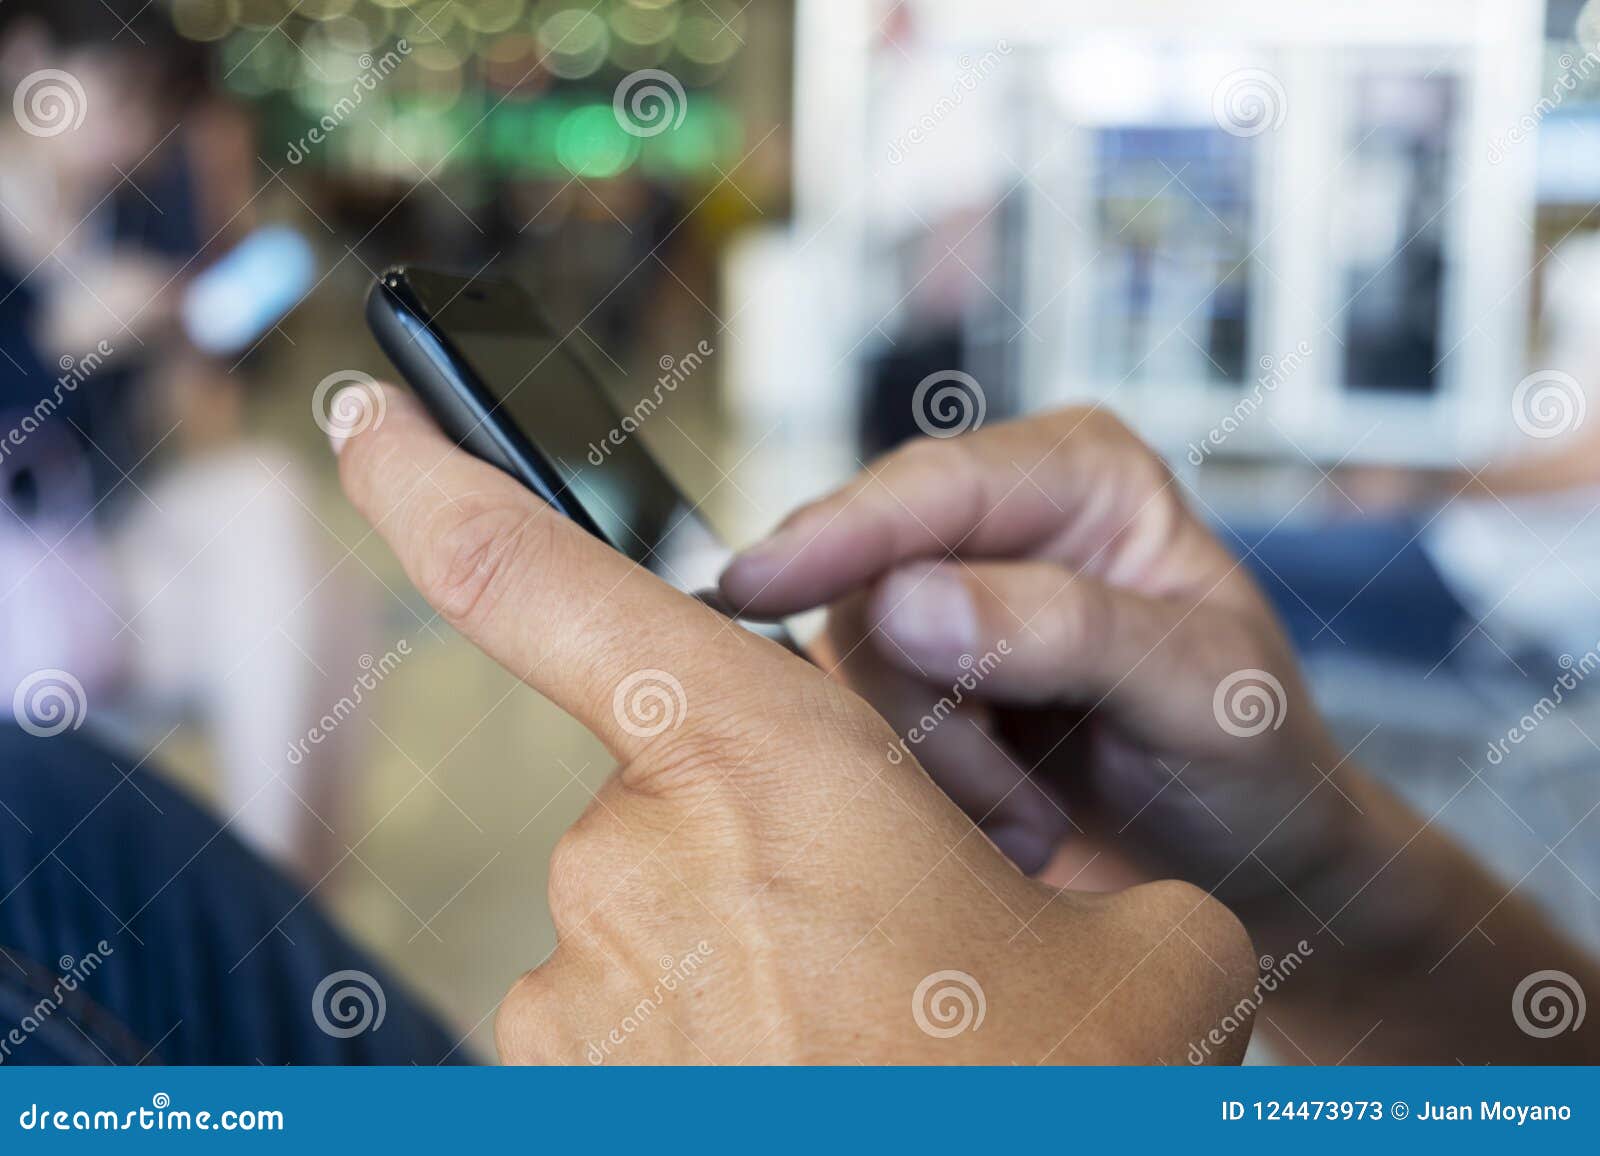 Man Using Smartphone in a Station or Airport Stock Image - Image of ...